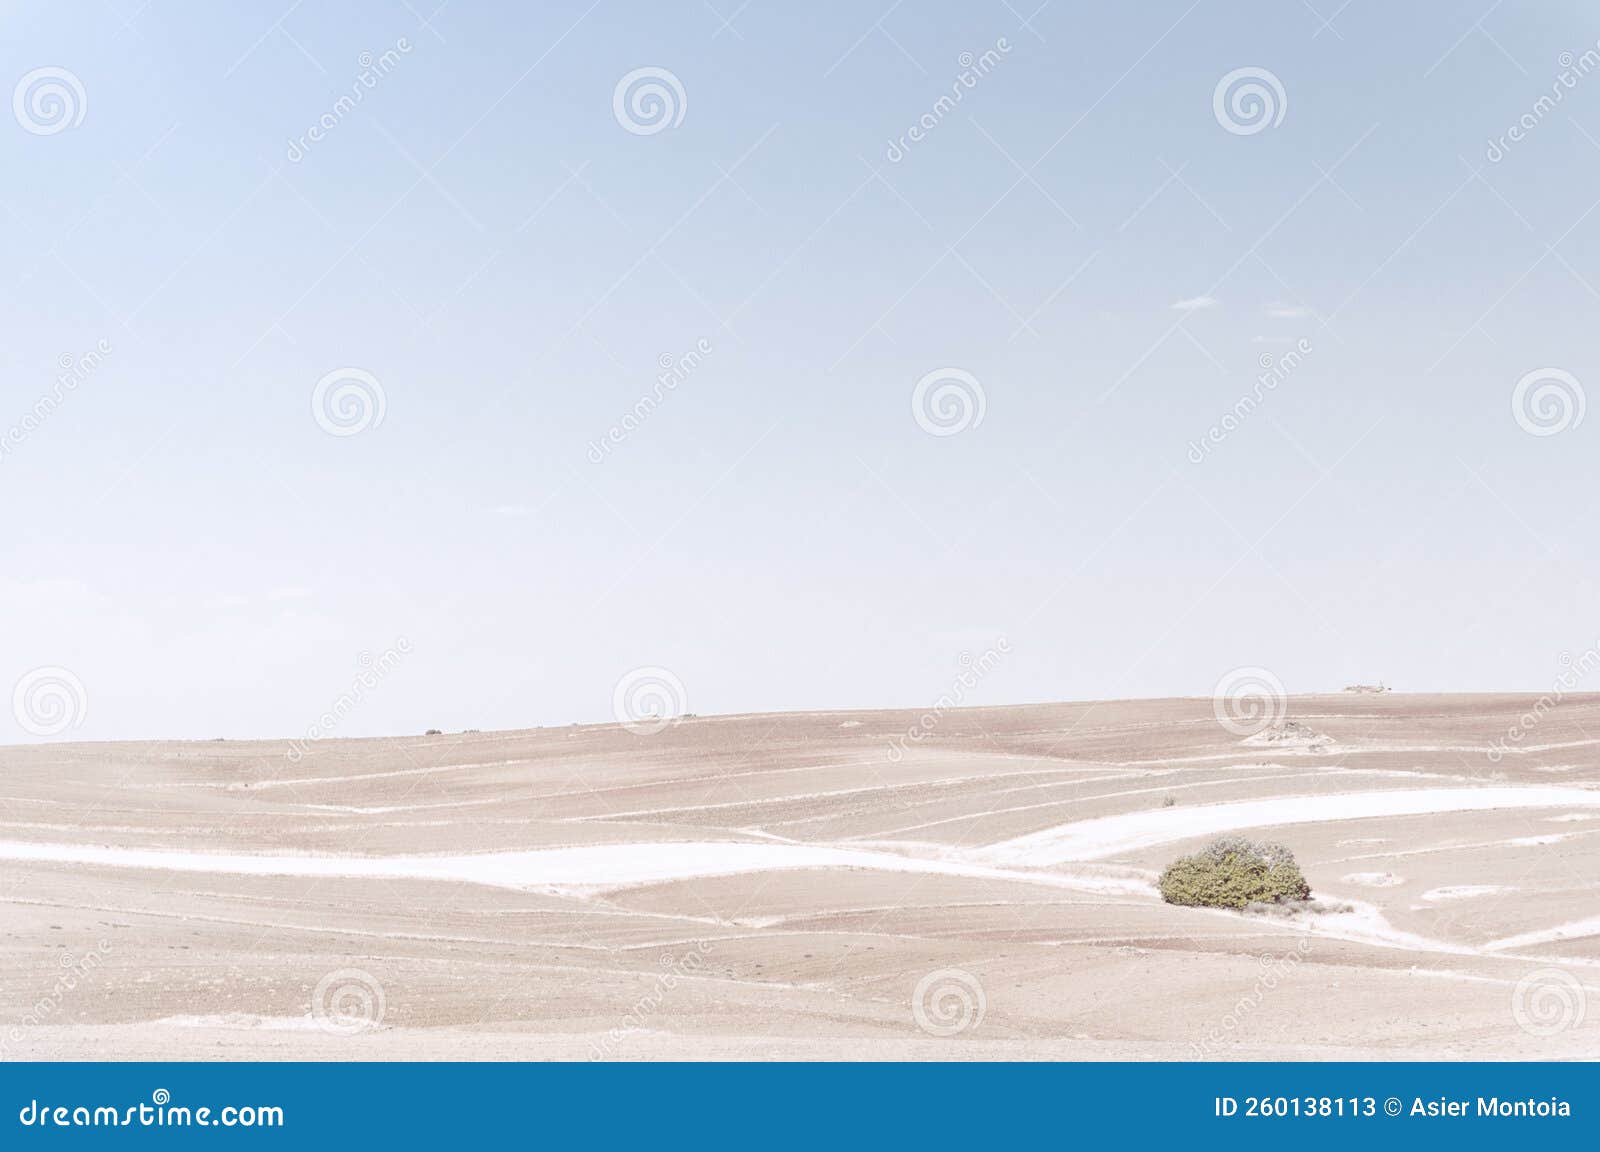 desert landscape in the south of the iberian peninsula